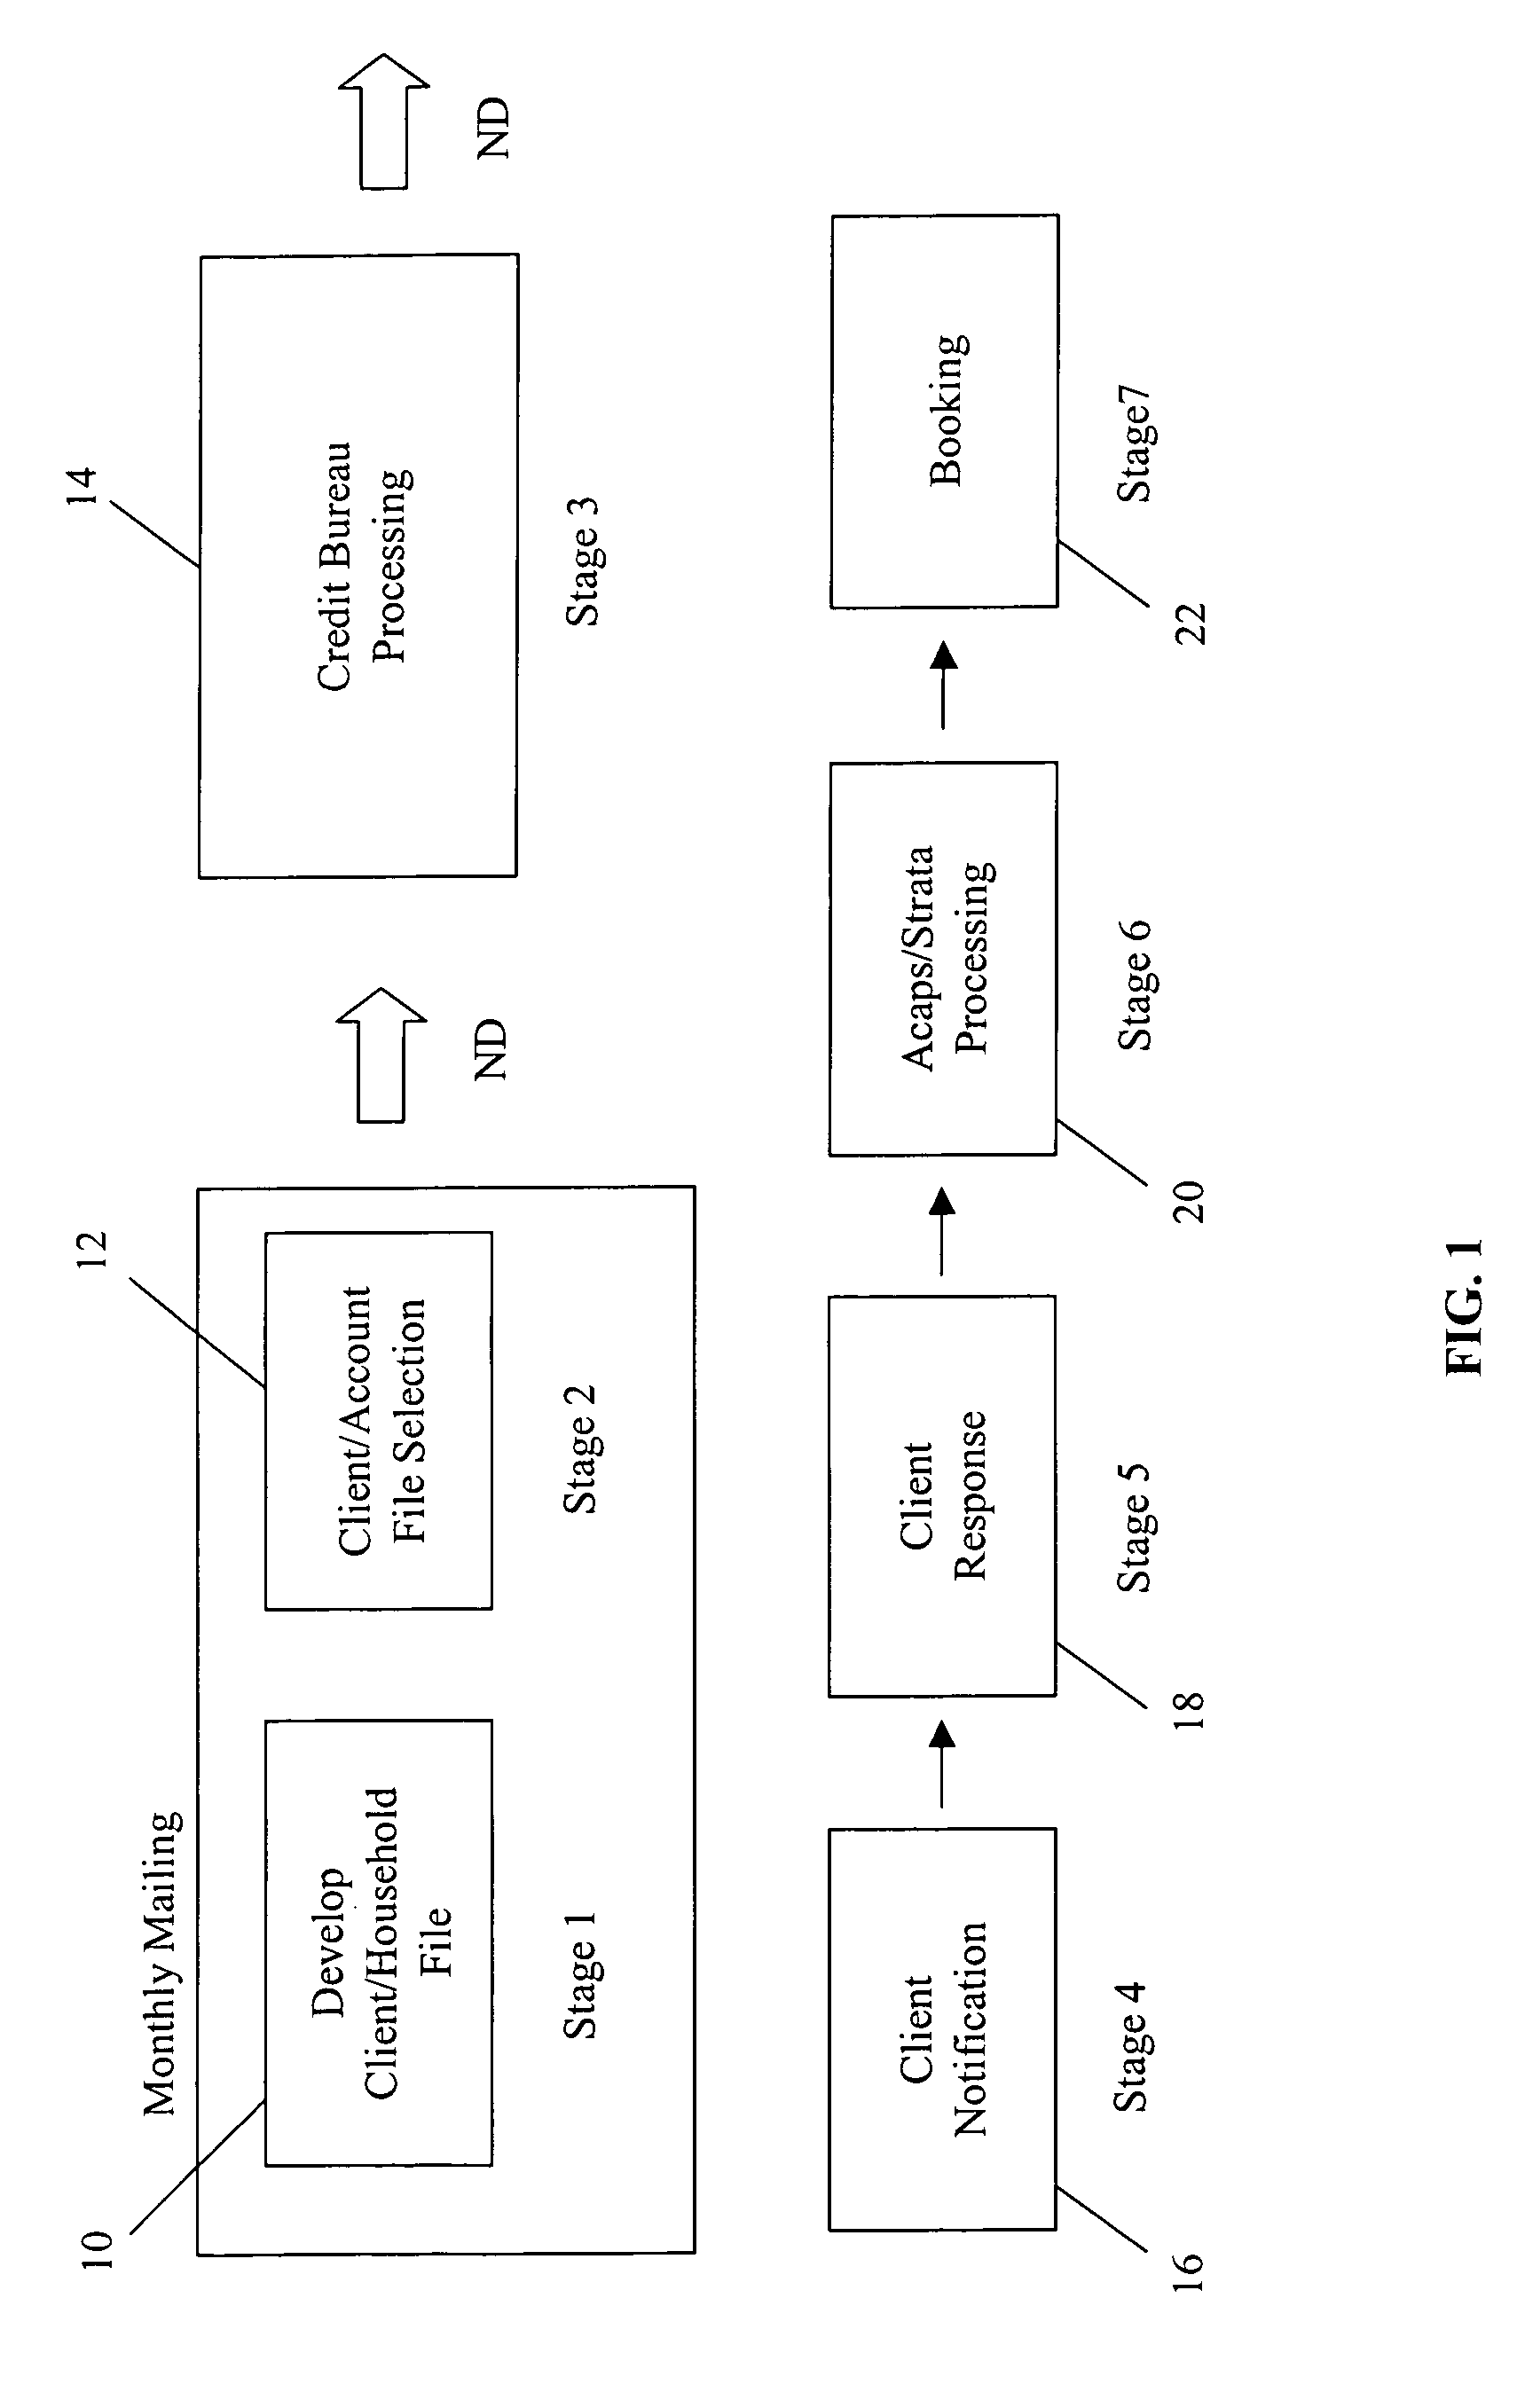 Systems and methods for offering credit line products